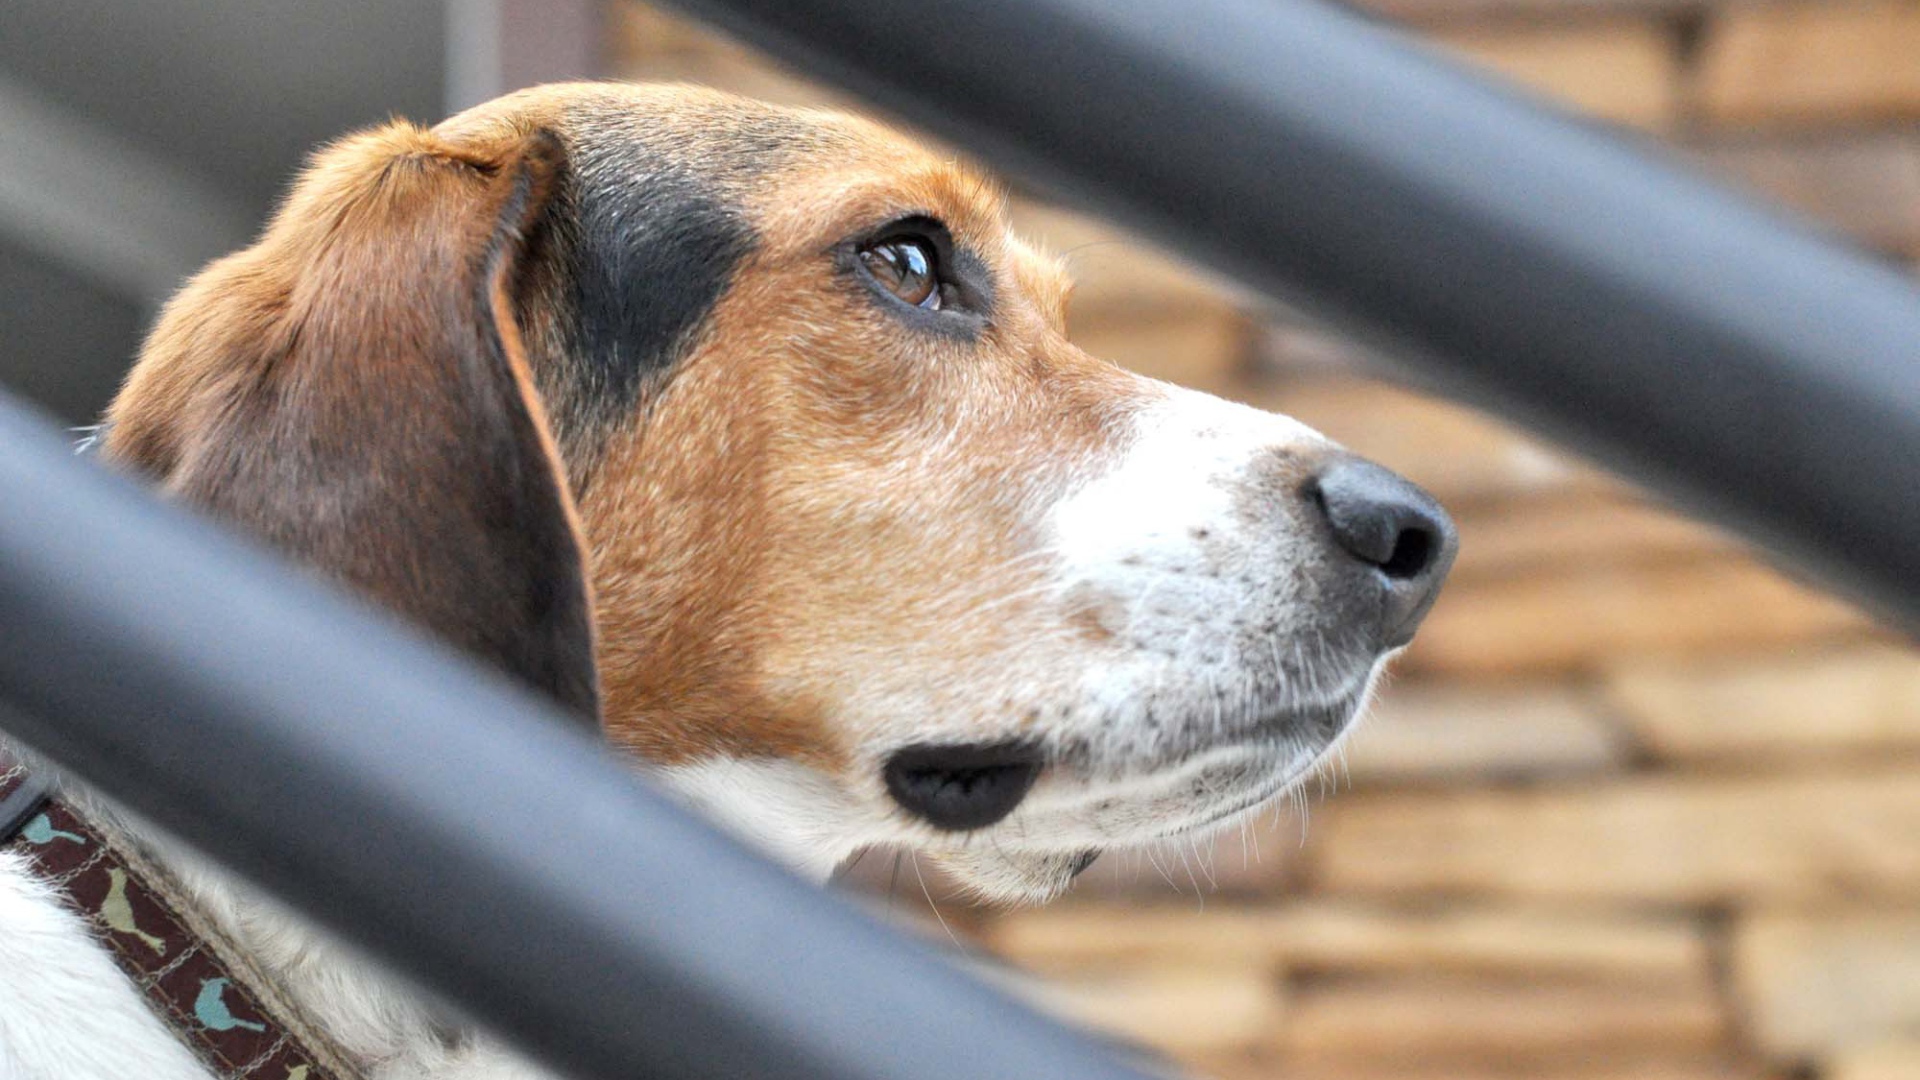 Beagle dog lost in thought about something